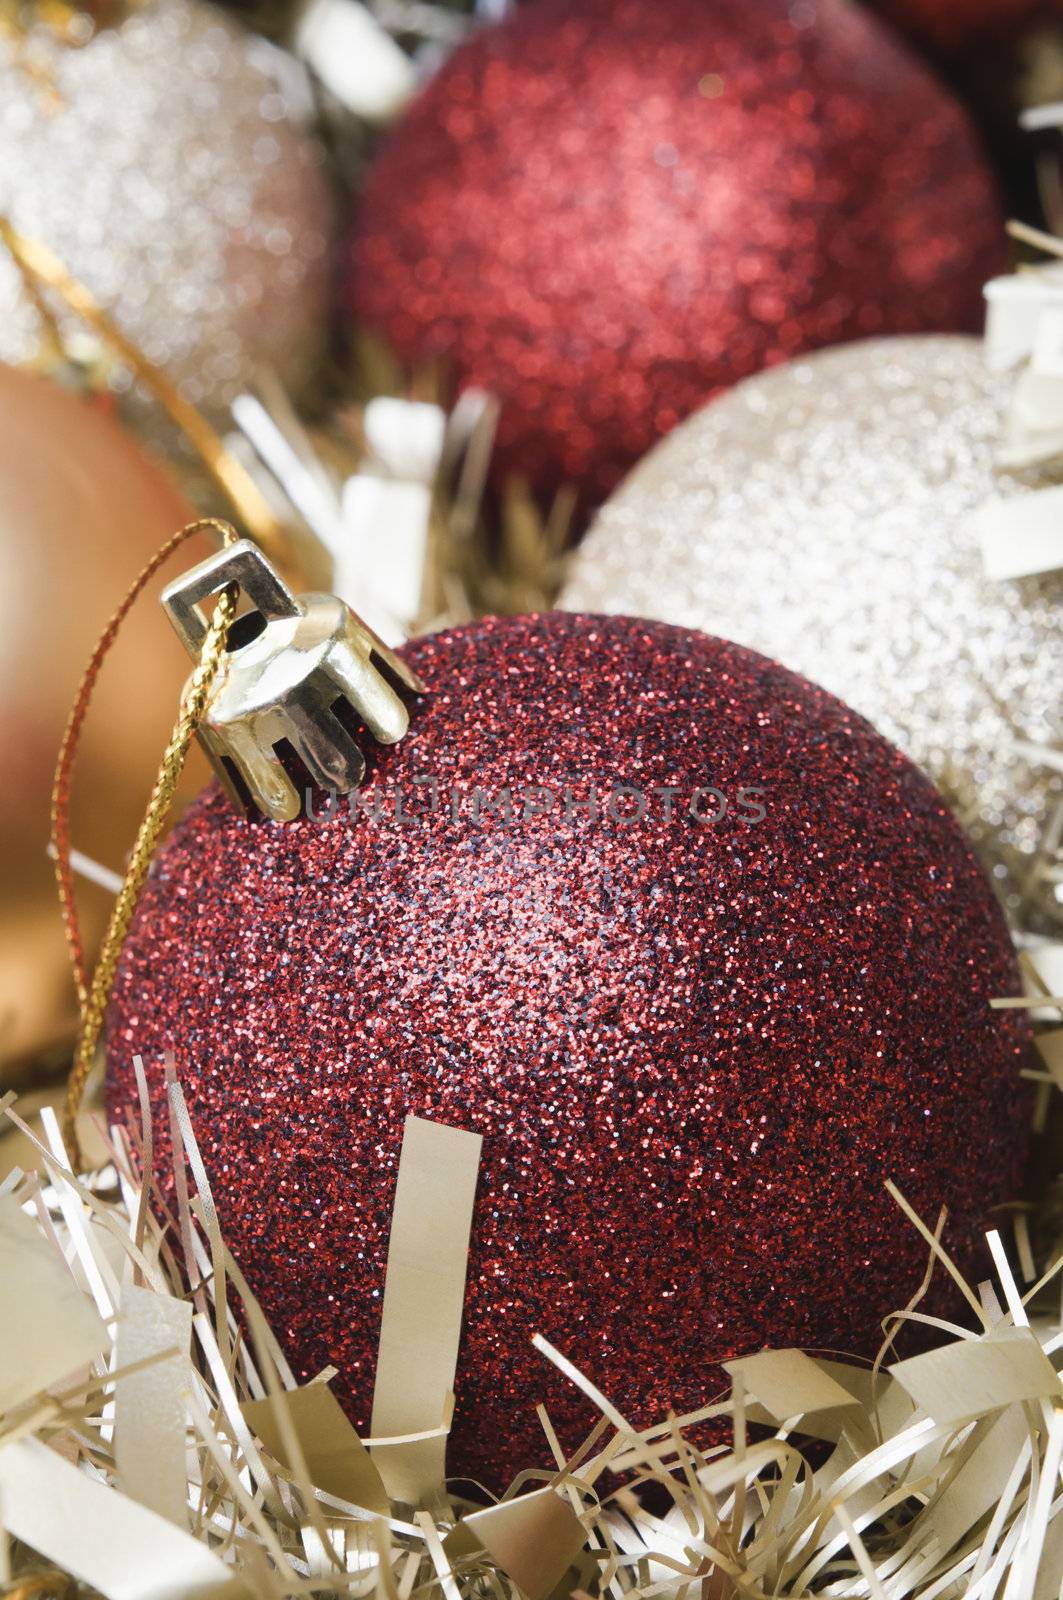 Close up of Christmas baubles and gold tinsel garland.  Red, sparkling bauble in foreground.  Portrait (vertical) orientation.  Shallow depth of field.